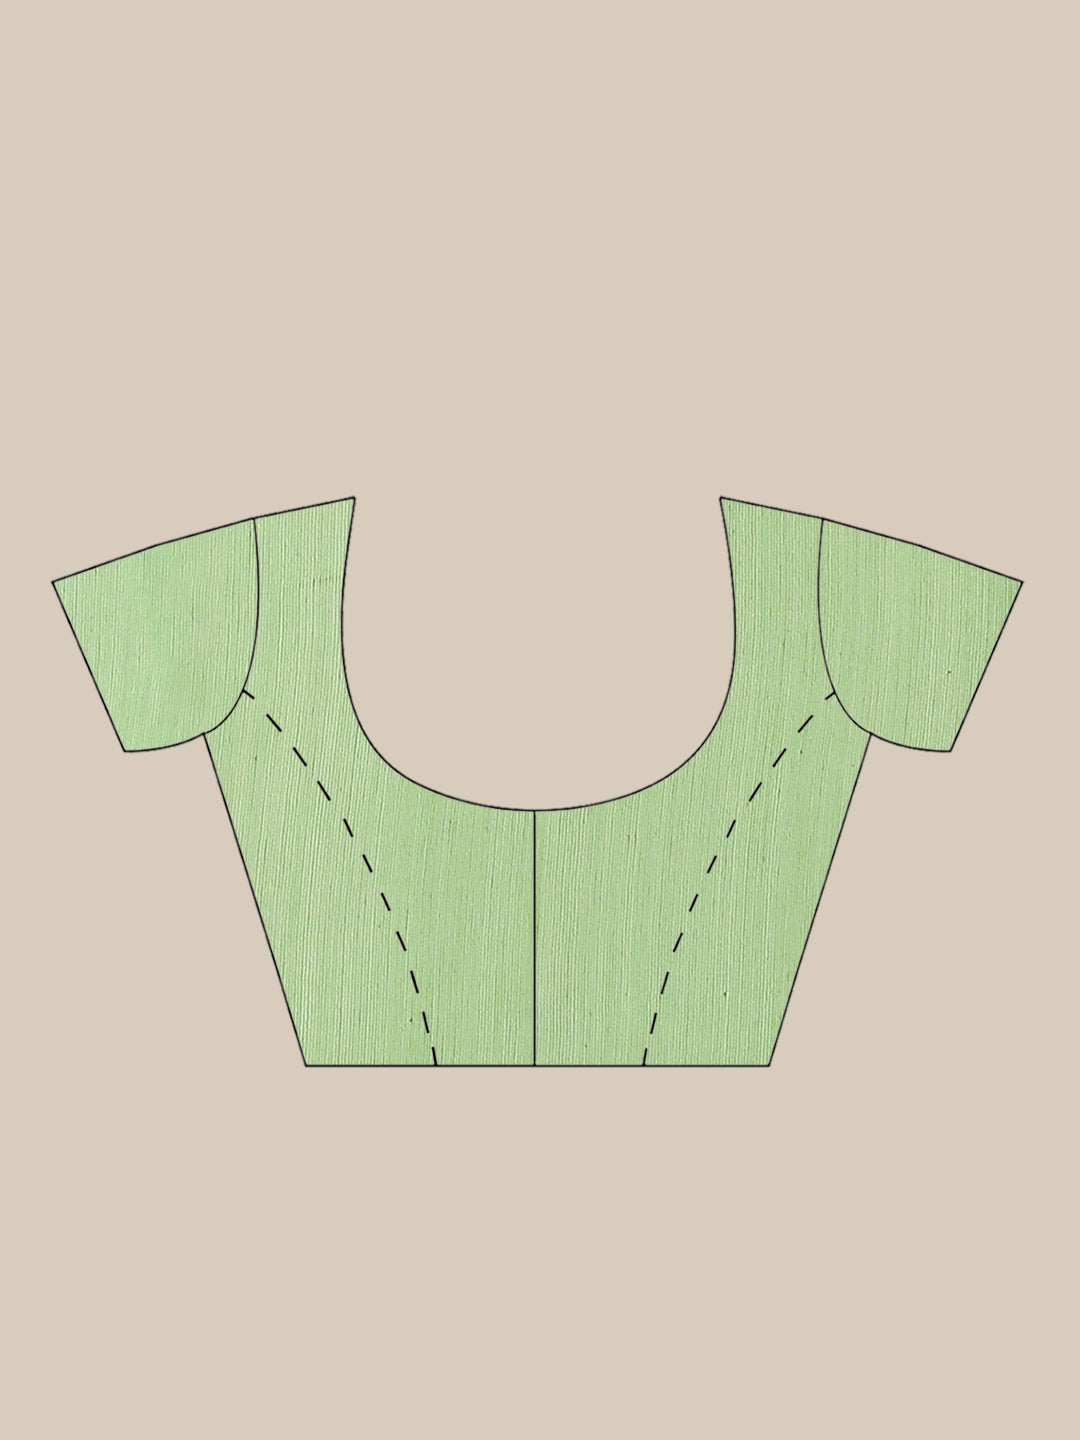 Wrap-Over Tie-Able Blouse PDF Pattern Download